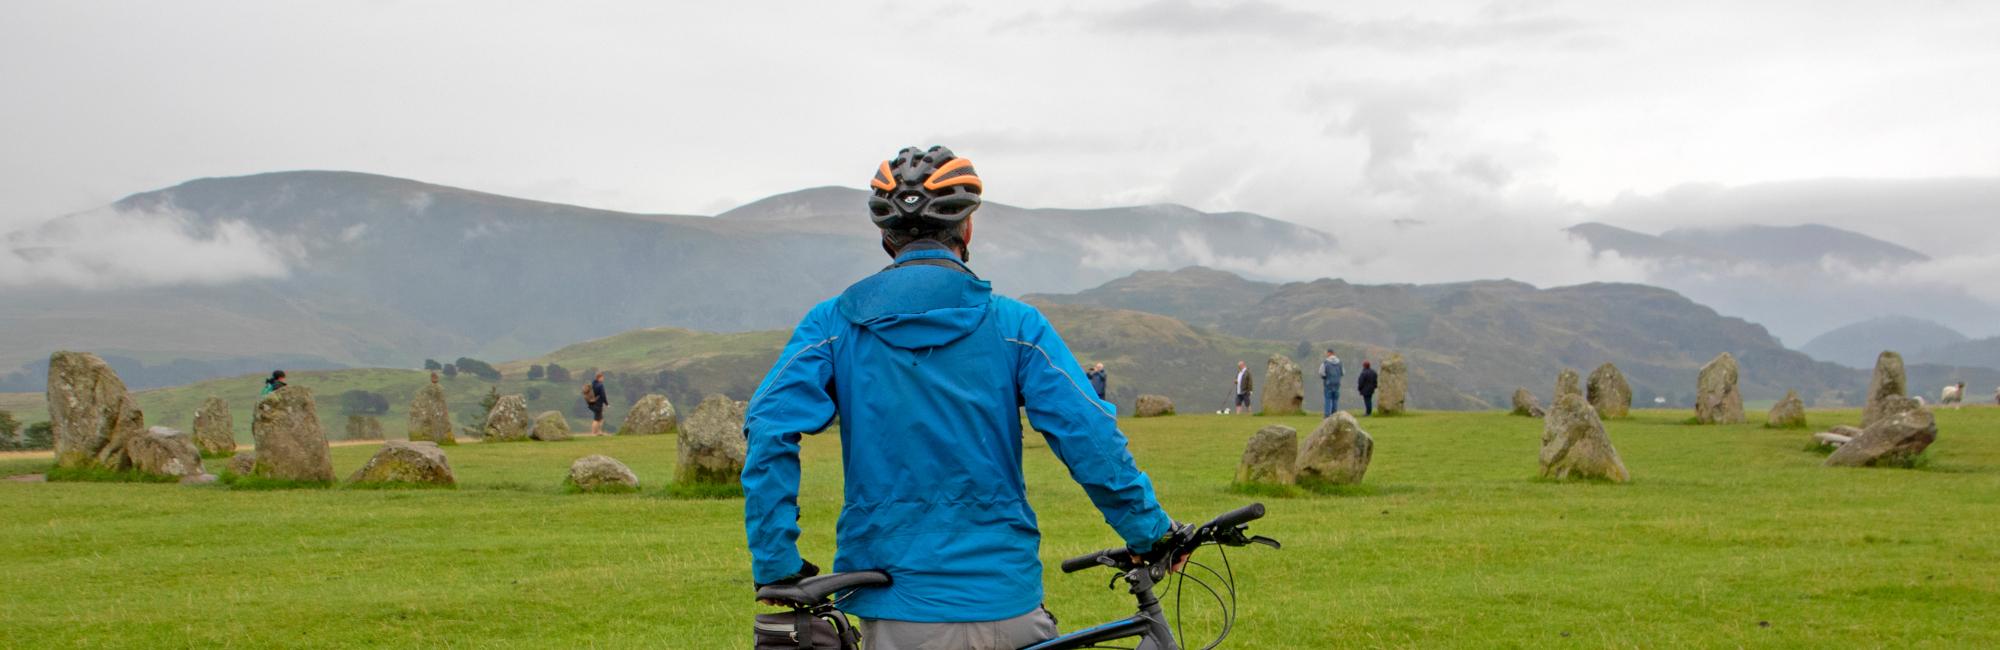 Explore Britain on a bike holiday